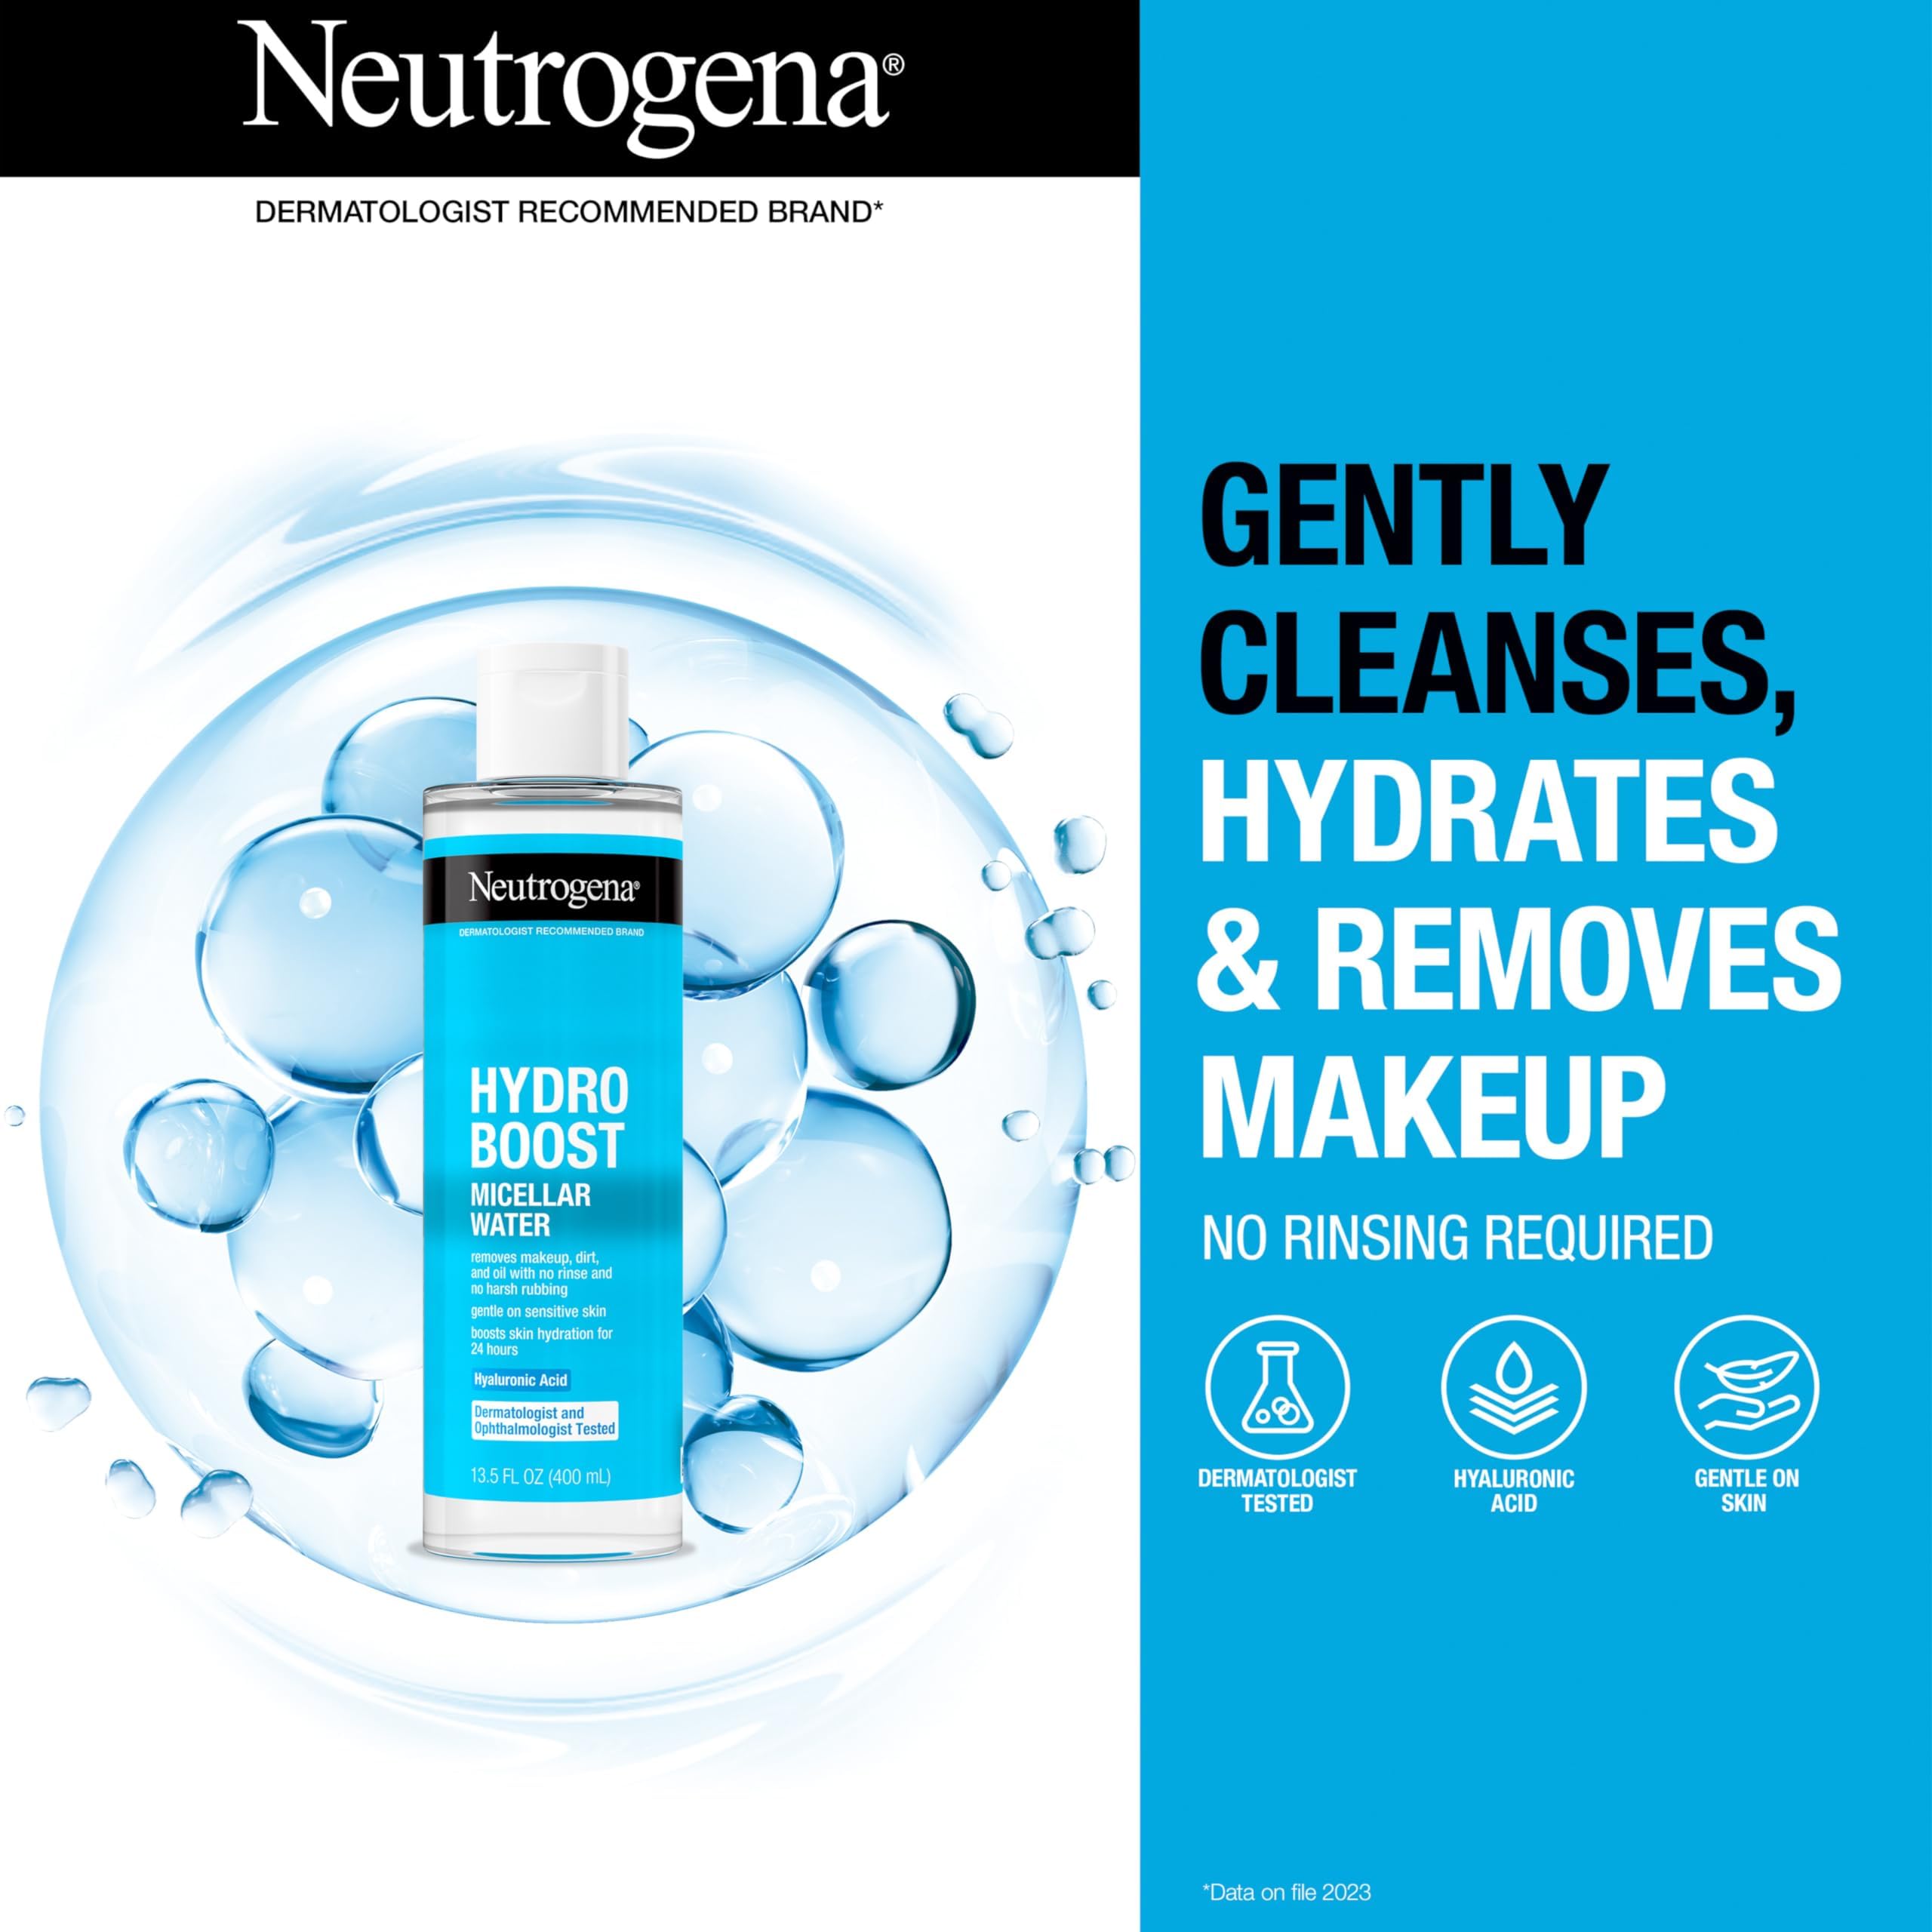 Neutrogena Hydro Boost Micellar Water with Hydrating Hyaluronic Acid, Micellar Cleansing Water for Sensitive Skin Removes Makeup, Dirt & Oil, Non-Comedogenic & Alcohol-Free, 13.5 fl. Oz